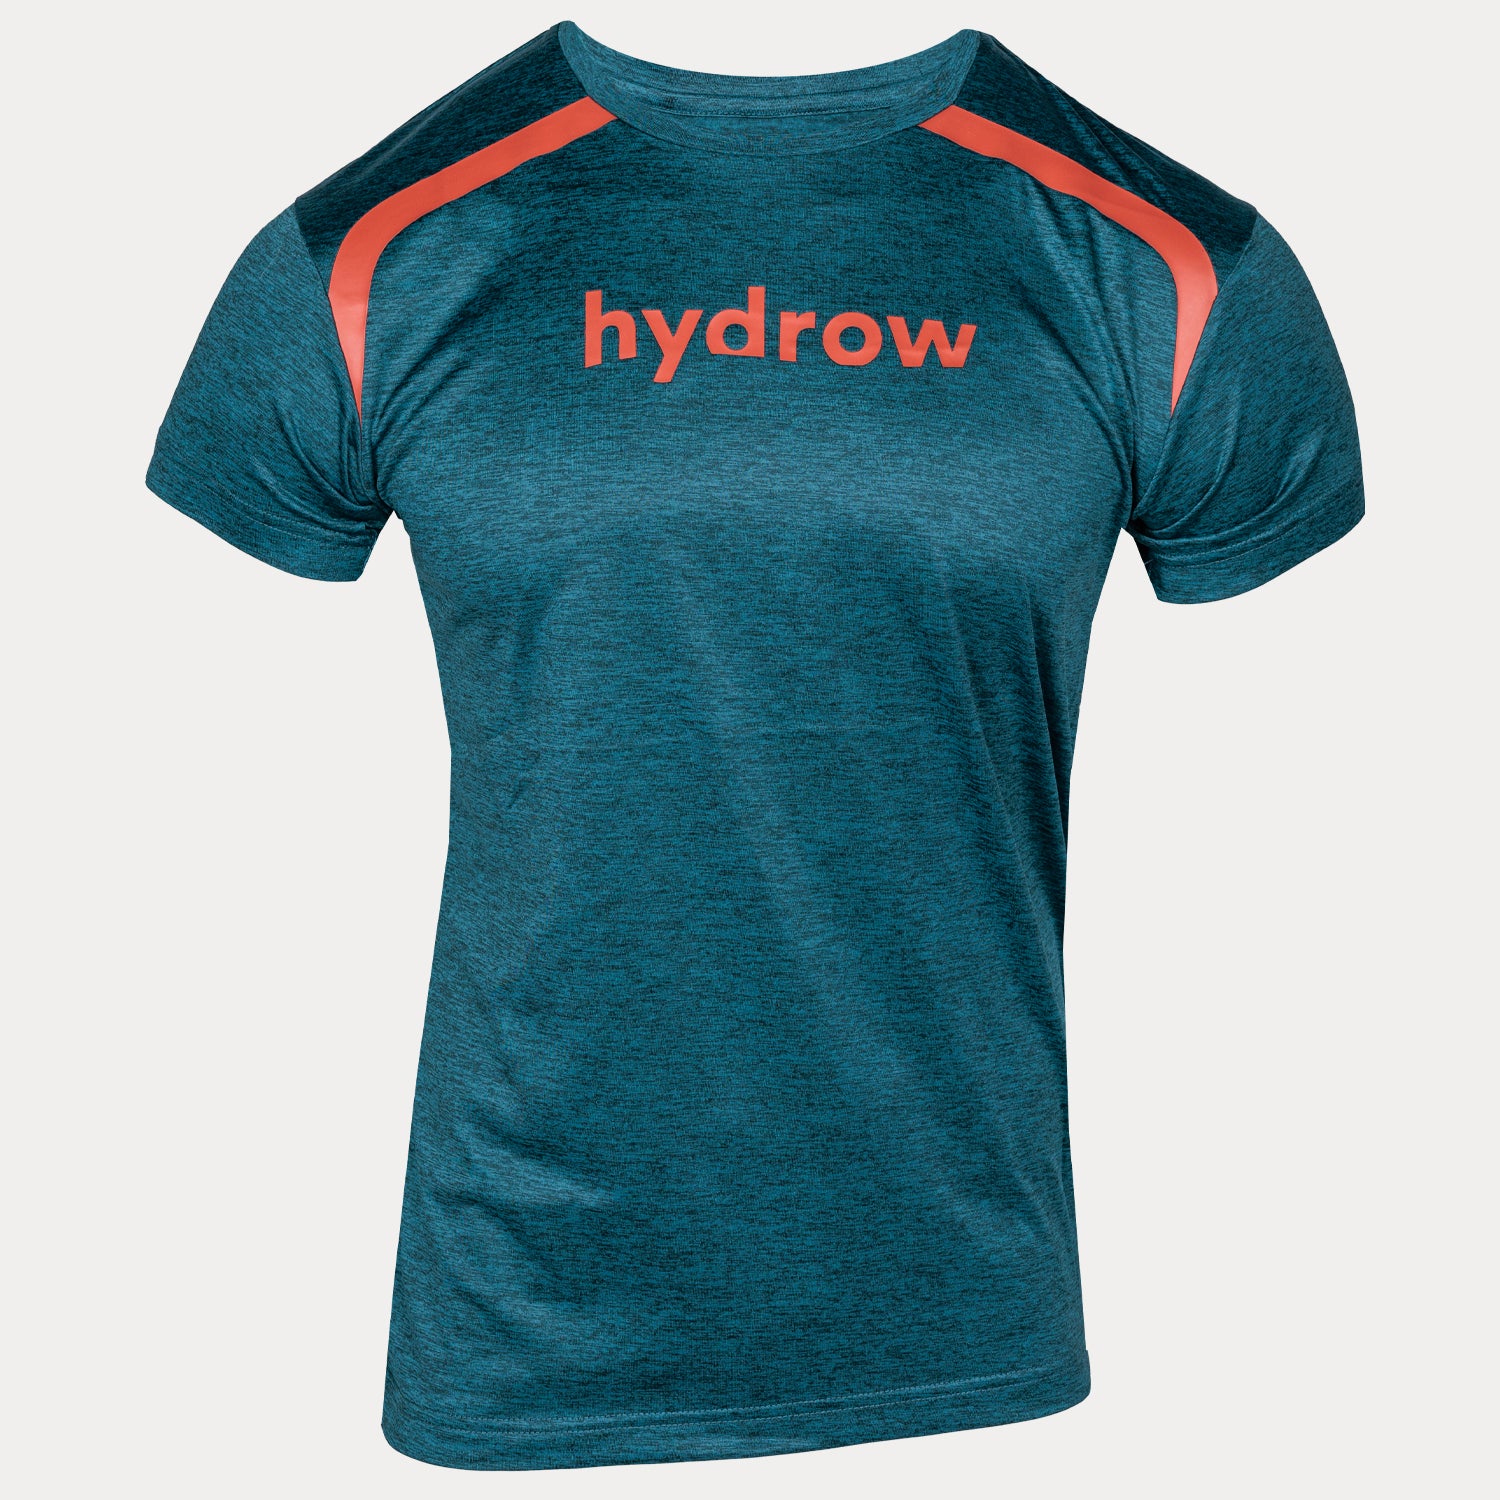 Hydrow Apparel Store